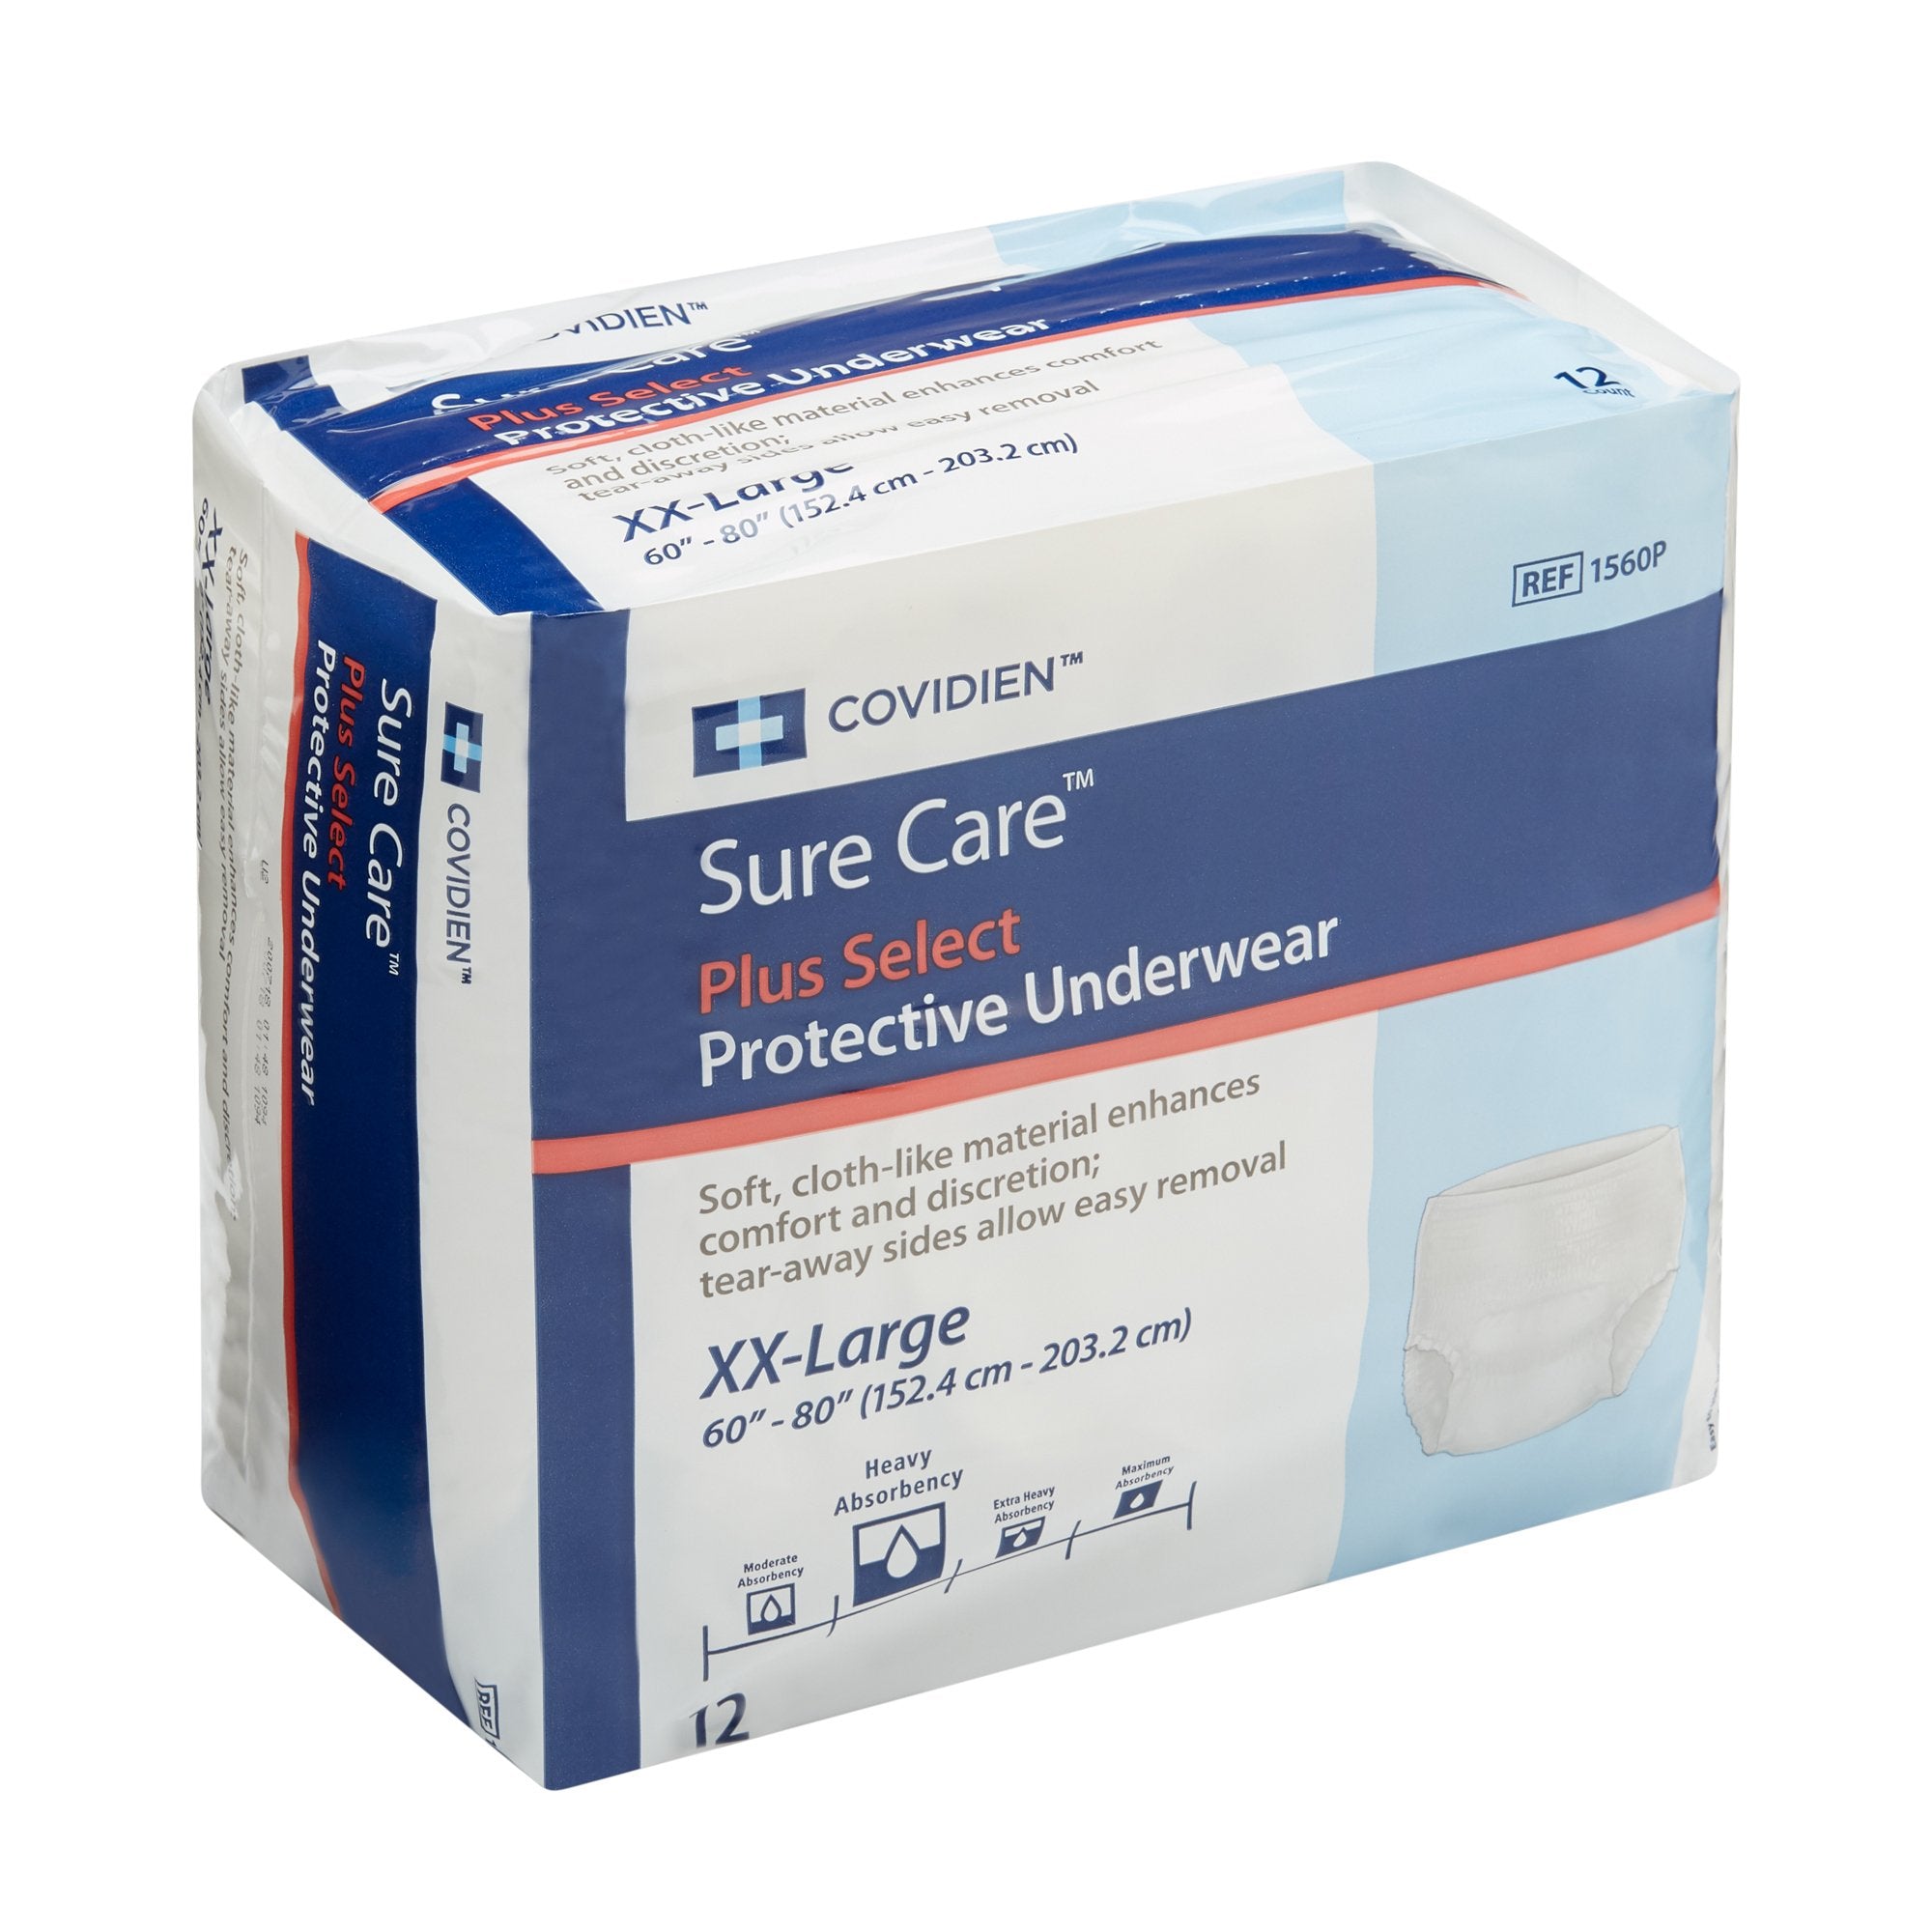 Sure Care Unisex Adult Absorbent Underwear, 2X-Large, 12-Pack